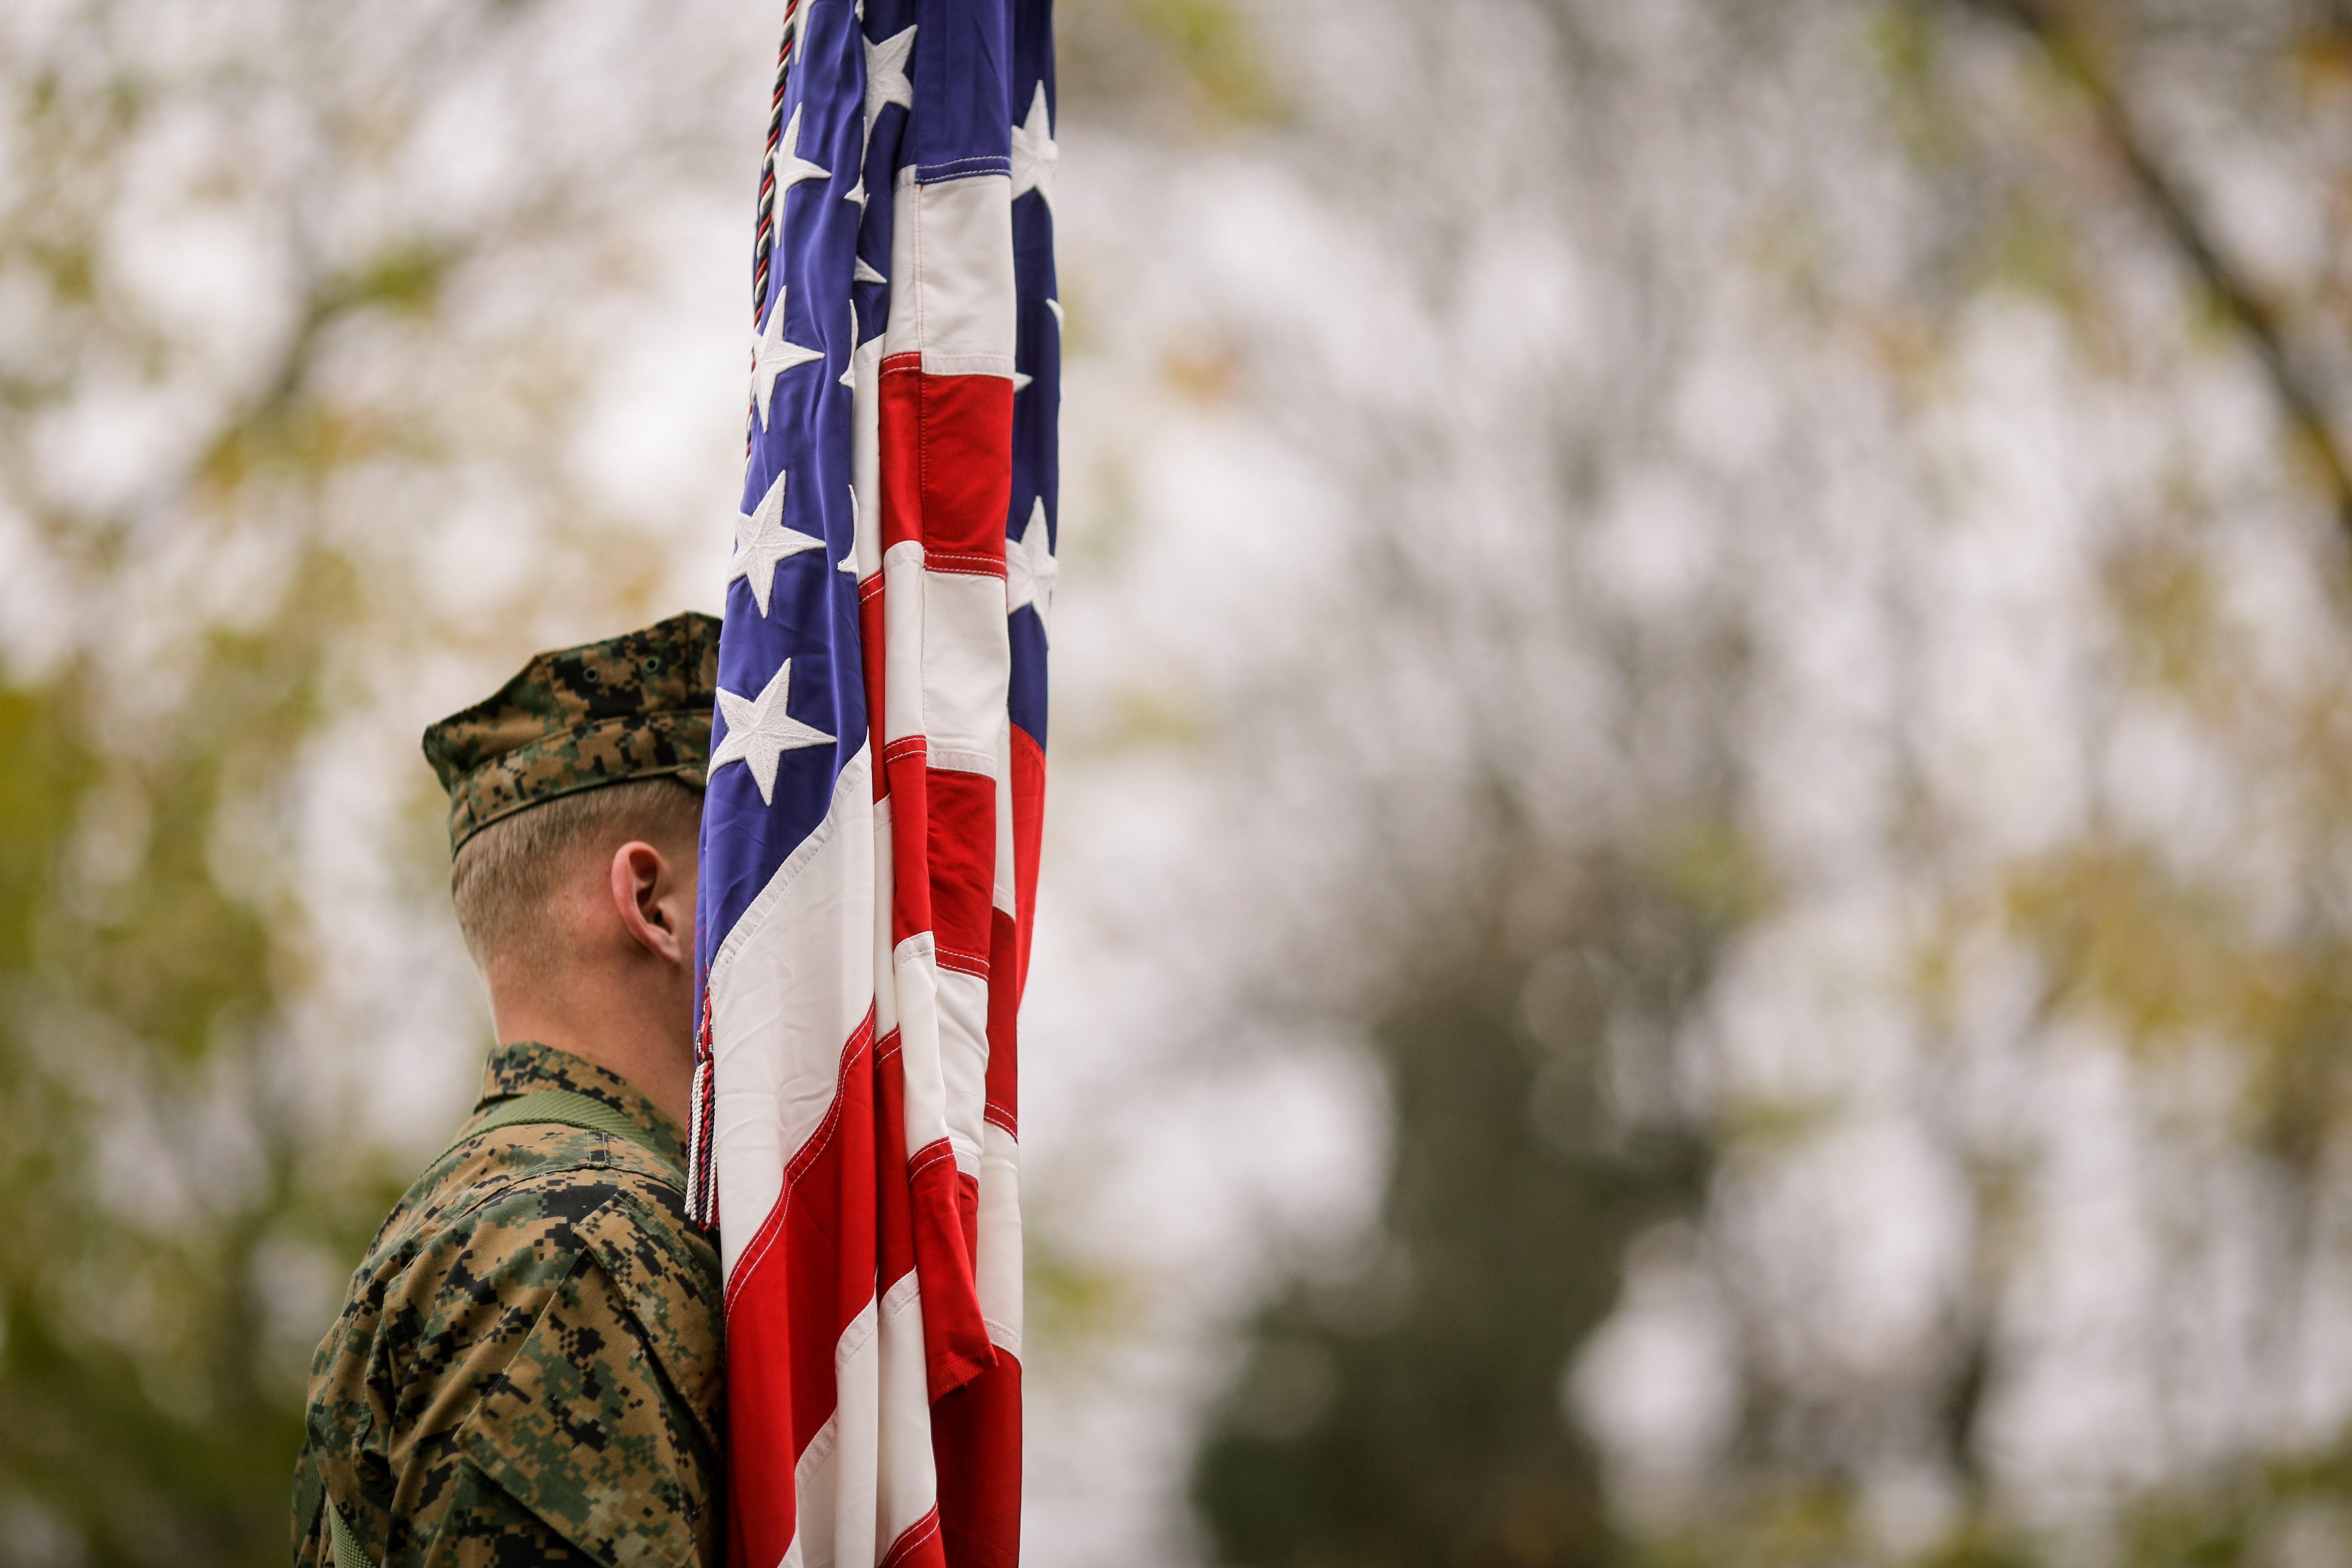 Man in military uniform standing behind US flag